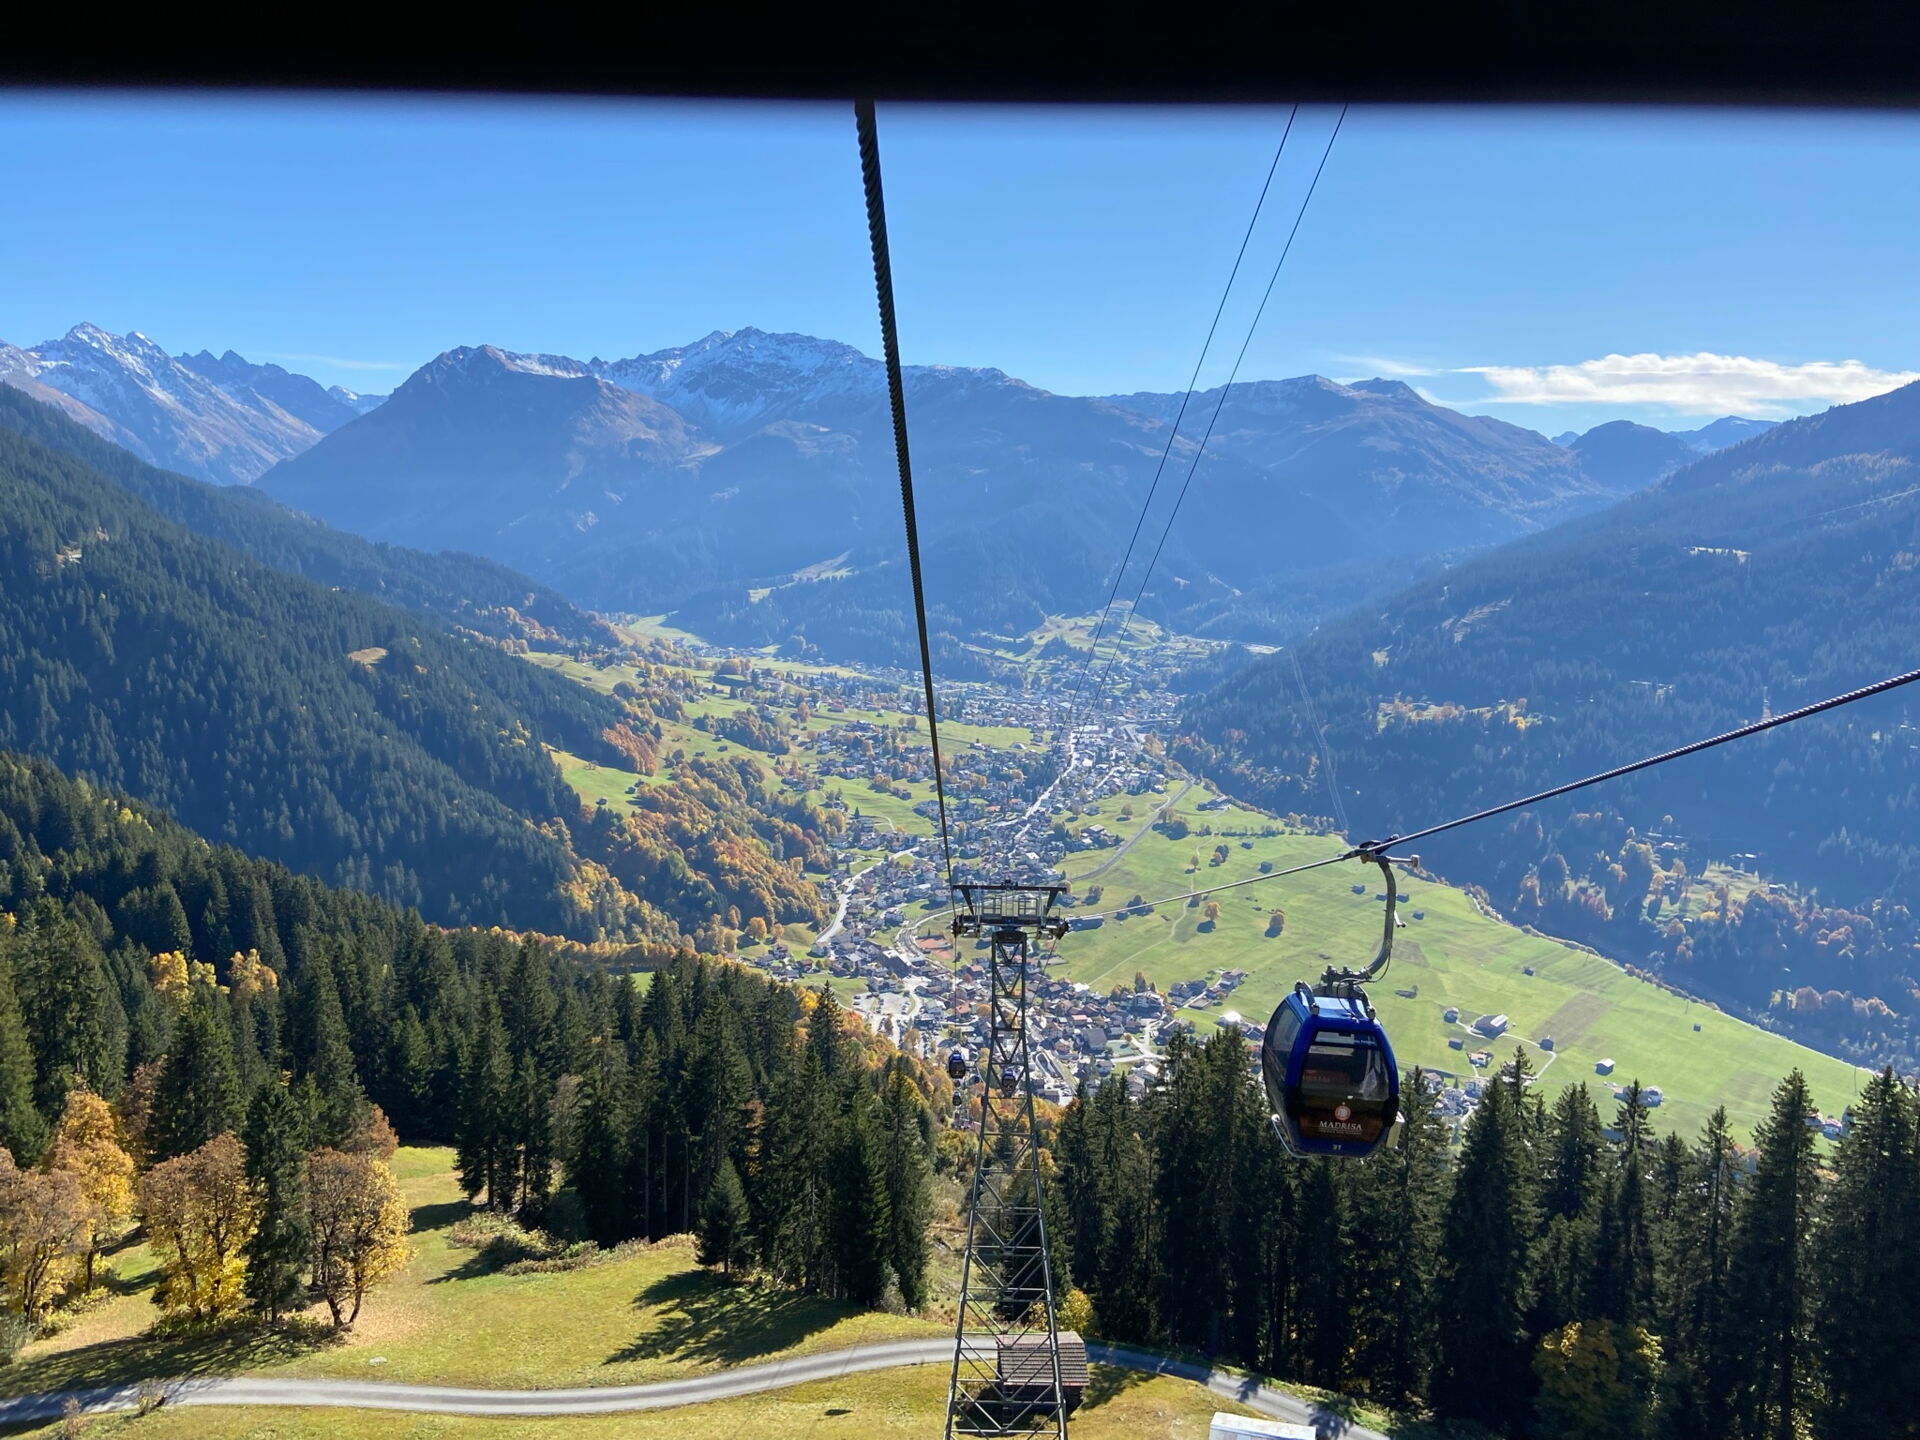 Madrisa train ride with a view of Klosters